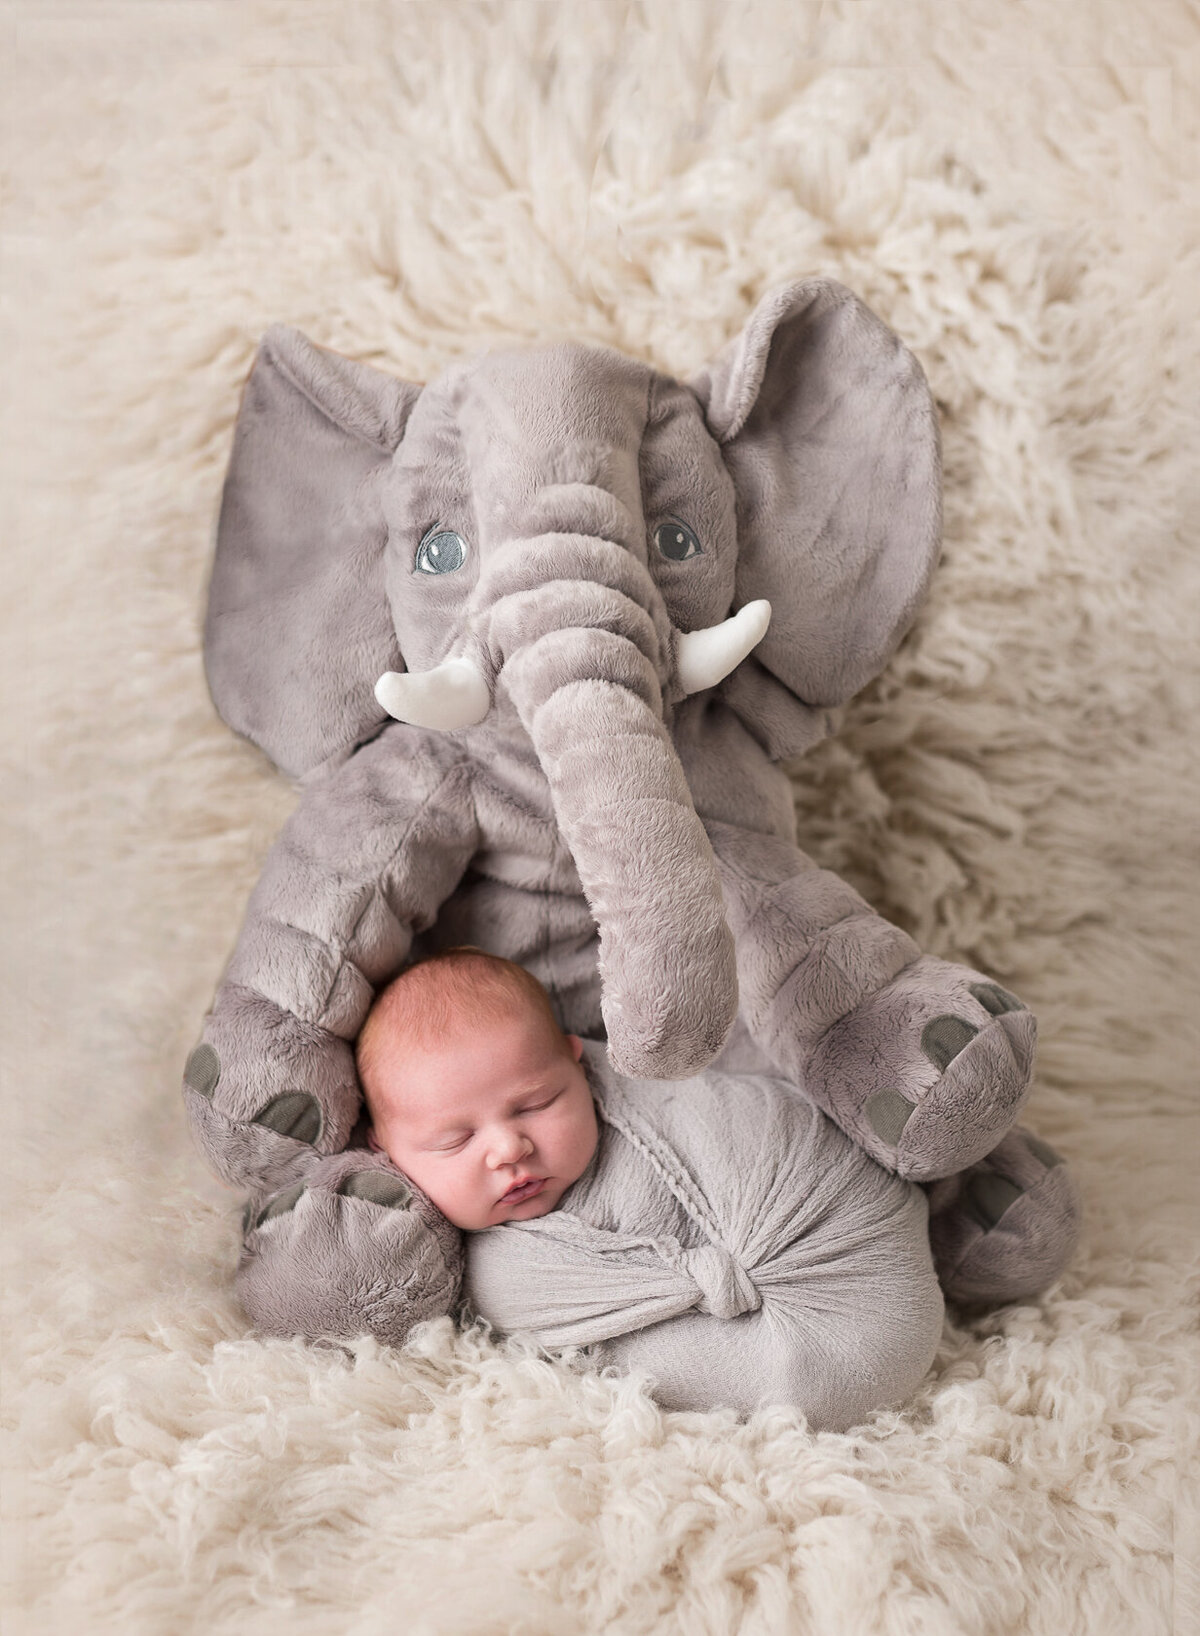 Newborn in a creative elephant photoshoot by Laura King Photography